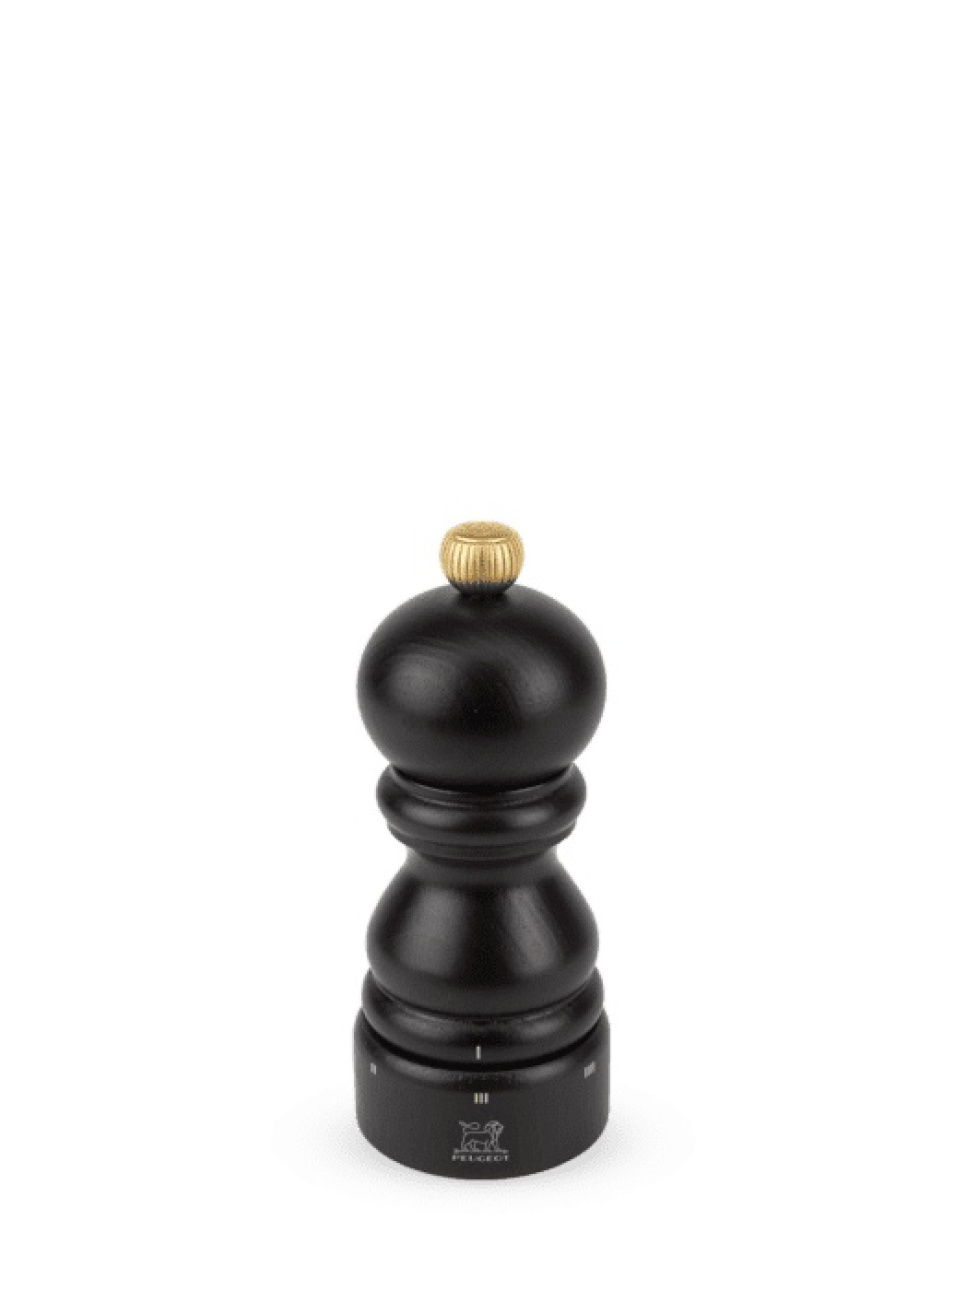 Paris Pepper mill 12 cm, Chocolate brown - Peugeot in the group Cooking / Kitchen utensils / Salt & pepper mills at KitchenLab (1090-13446)